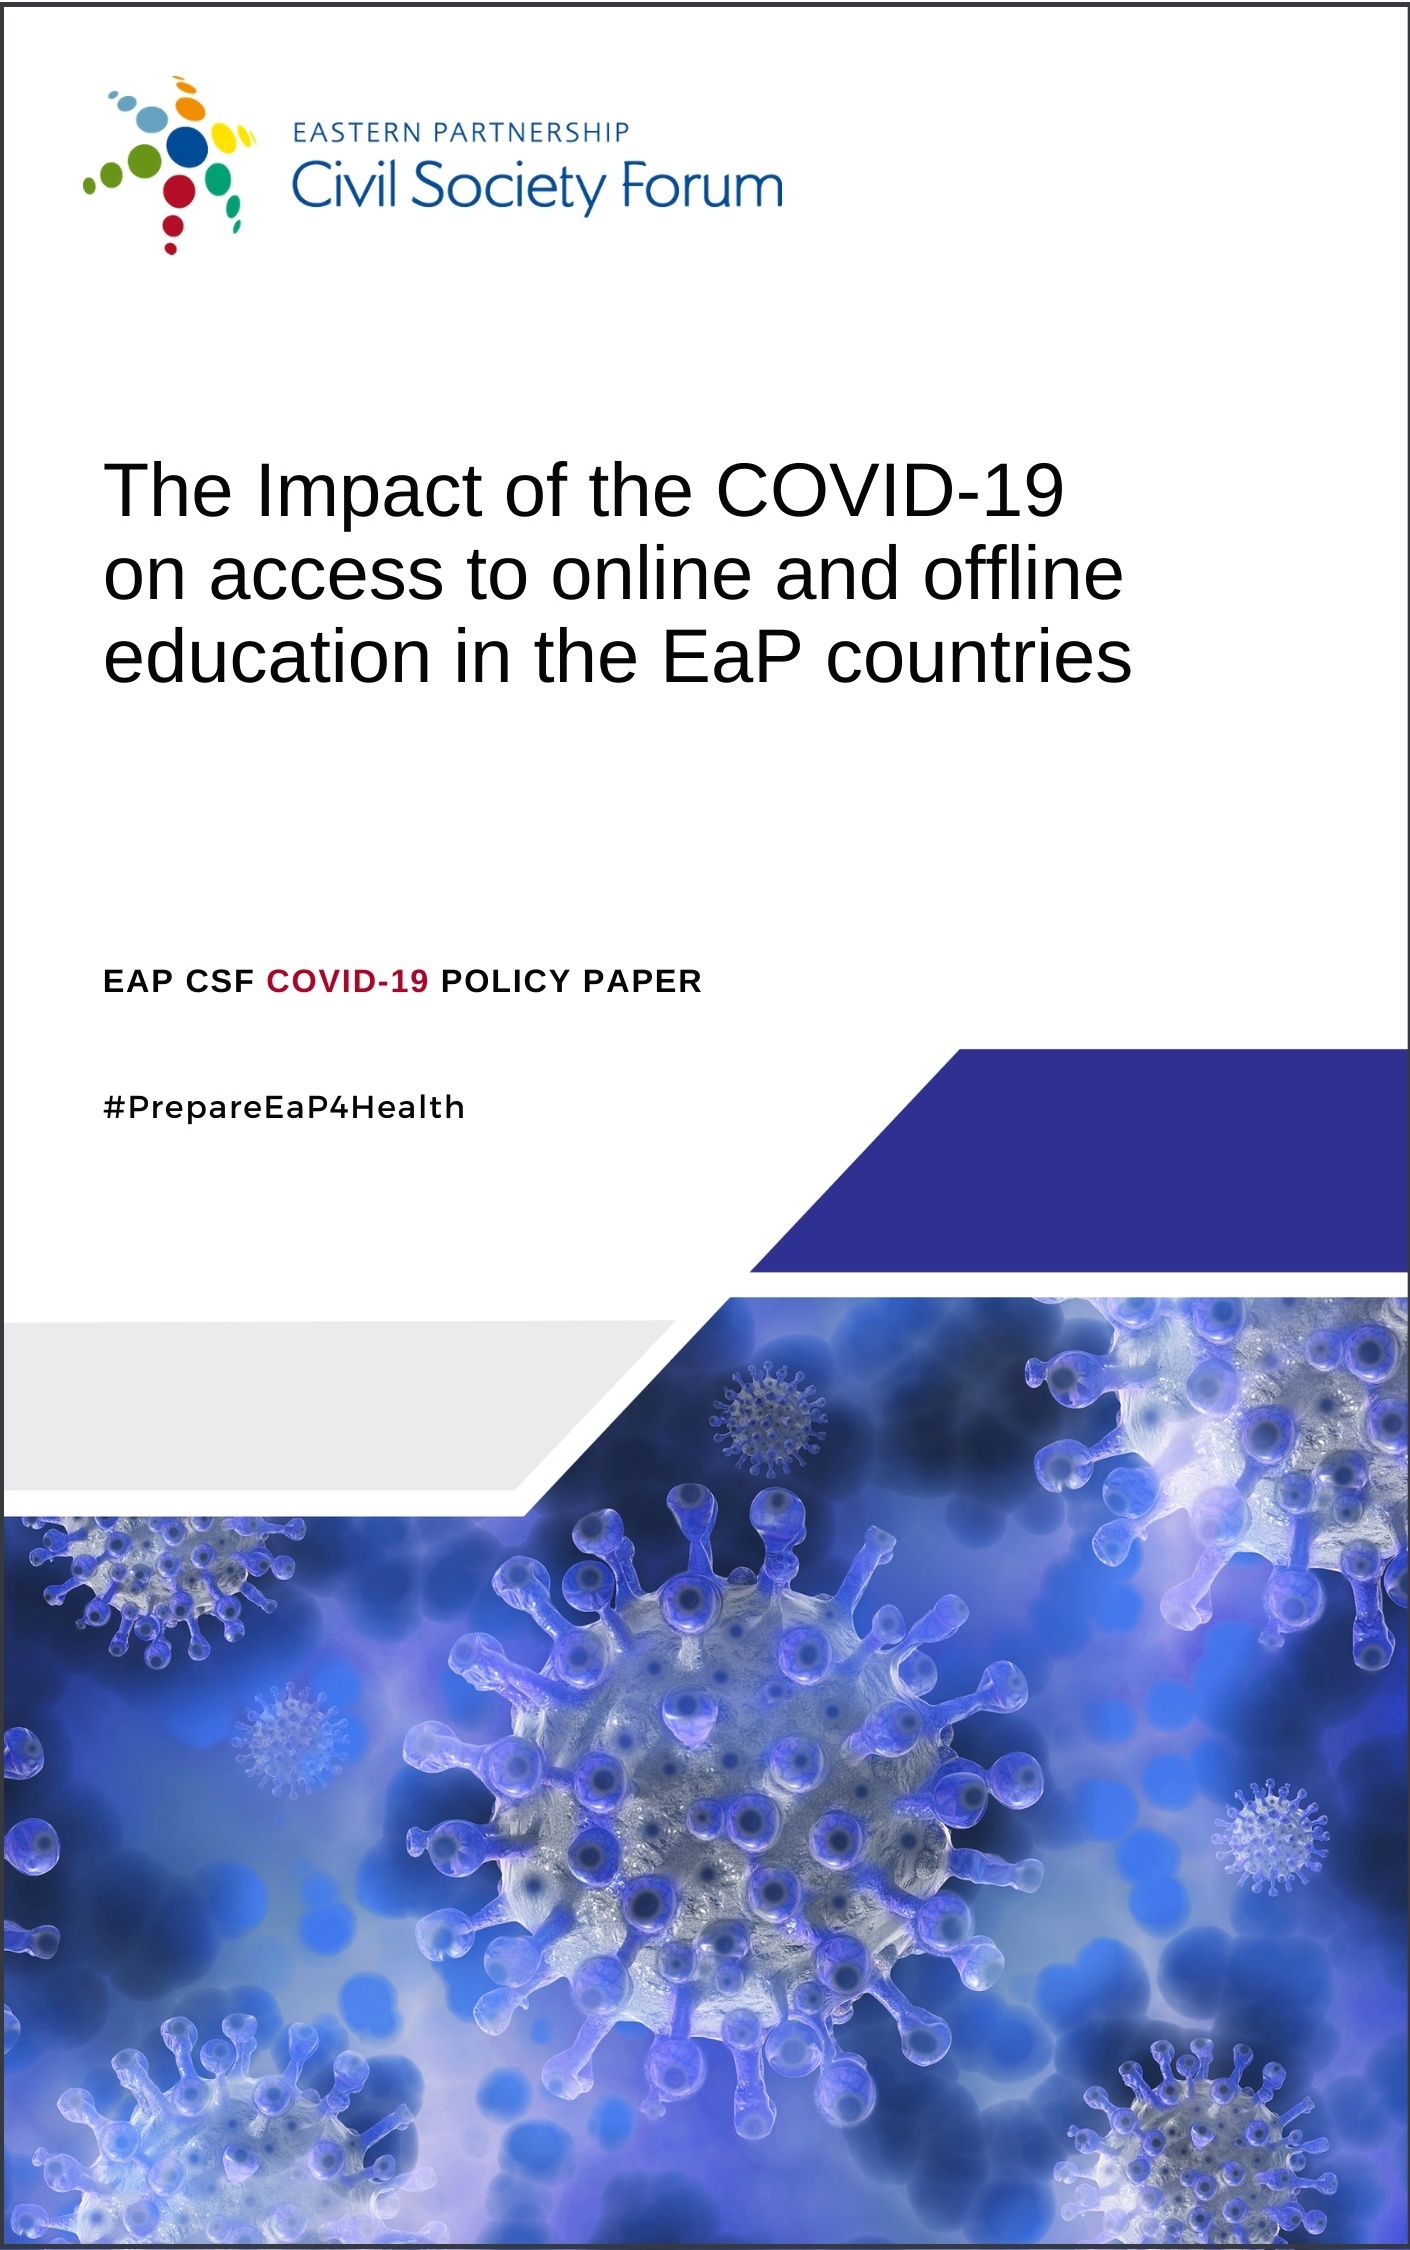 EaP CSF COVID-19 Policy Paper on access to online and offline education